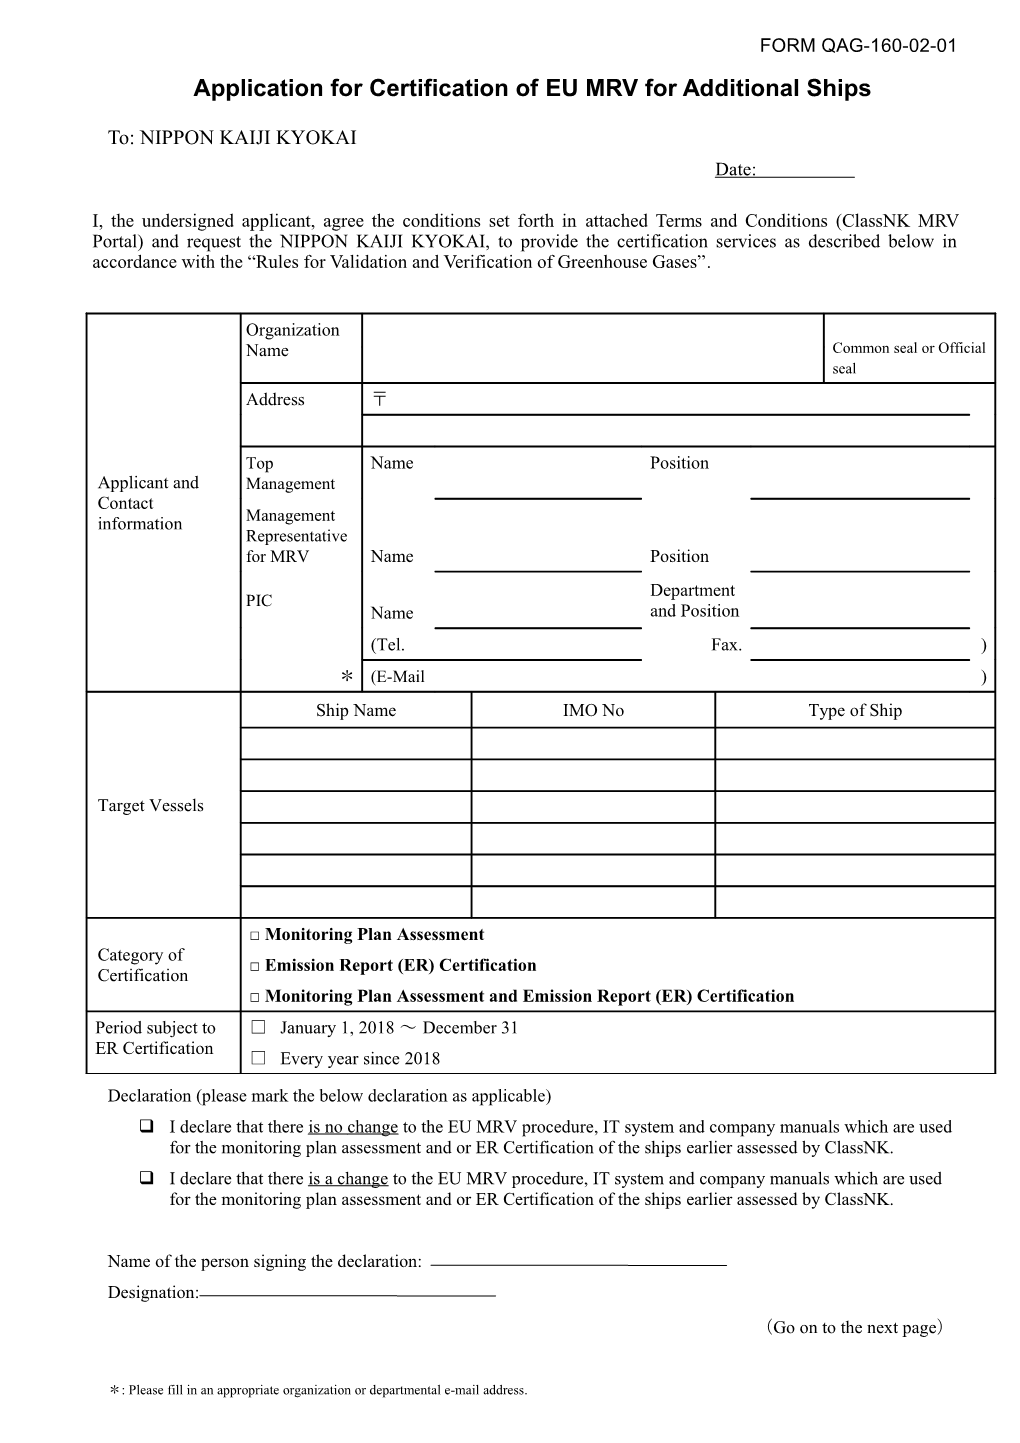 Application for Certification of EU Mrvfor Additional Ships